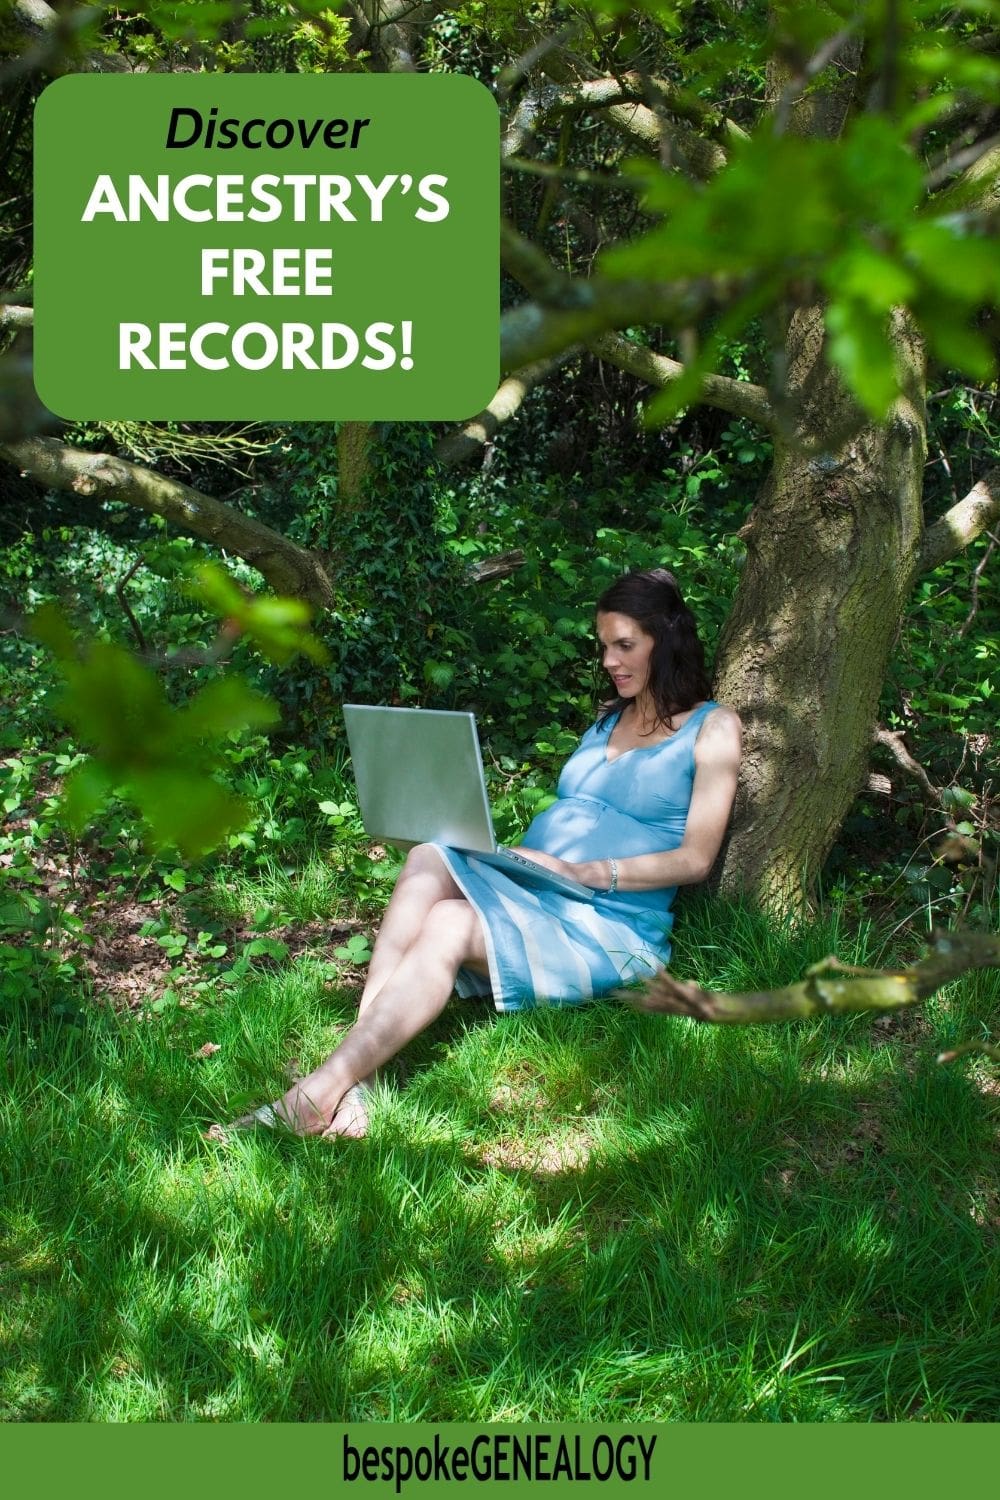 Discover Ancestry's free records. Photo of a woman in a forest looking at a laptop computer.